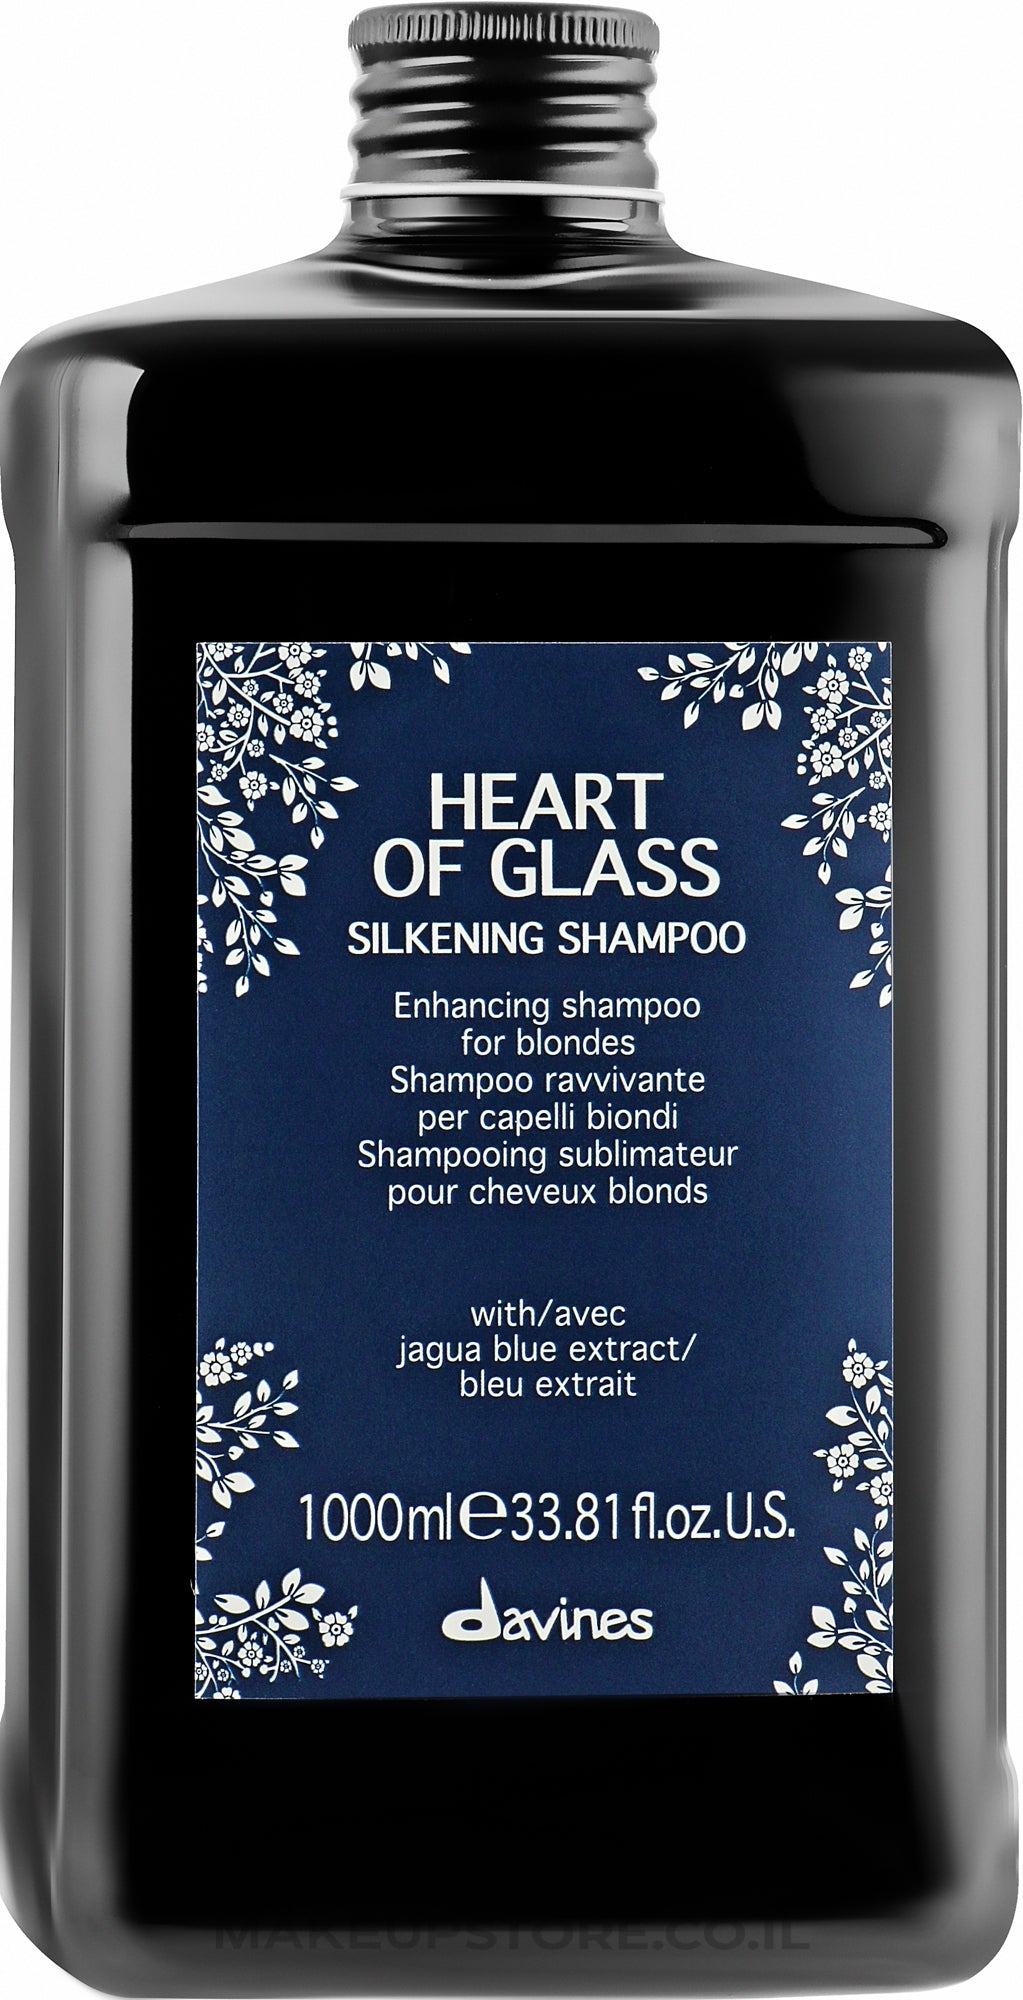 Davines HEART OF GLASS Silkening Shampoo 1000mls is suitable for blonde hair